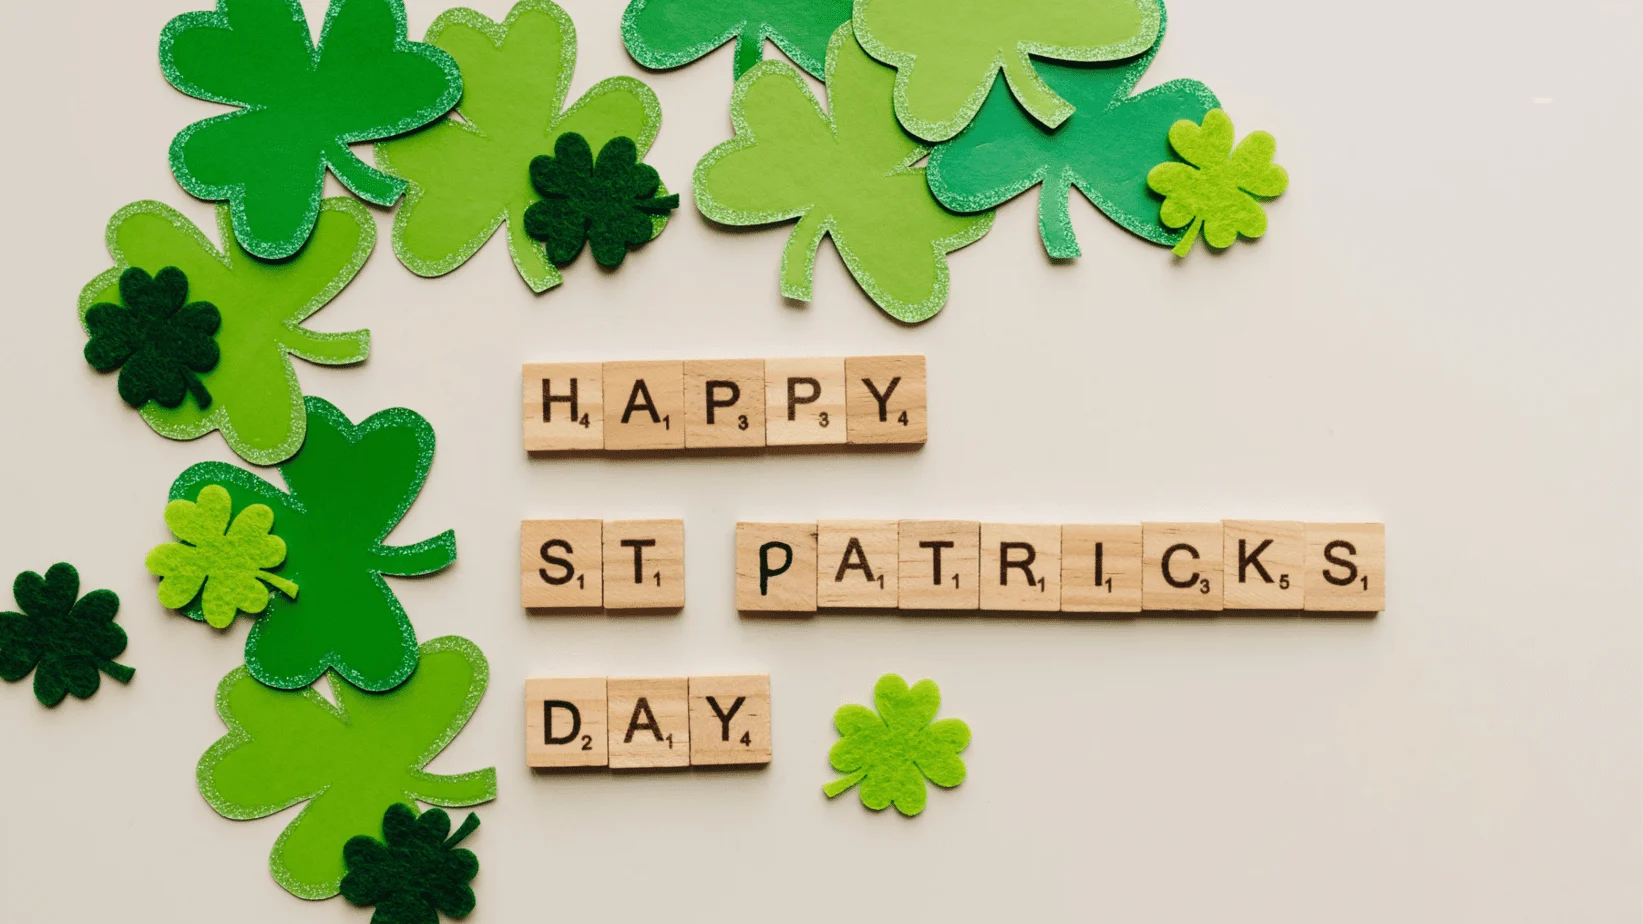 Have a great St Patrick's day and read these amazing St Patrick's day facts